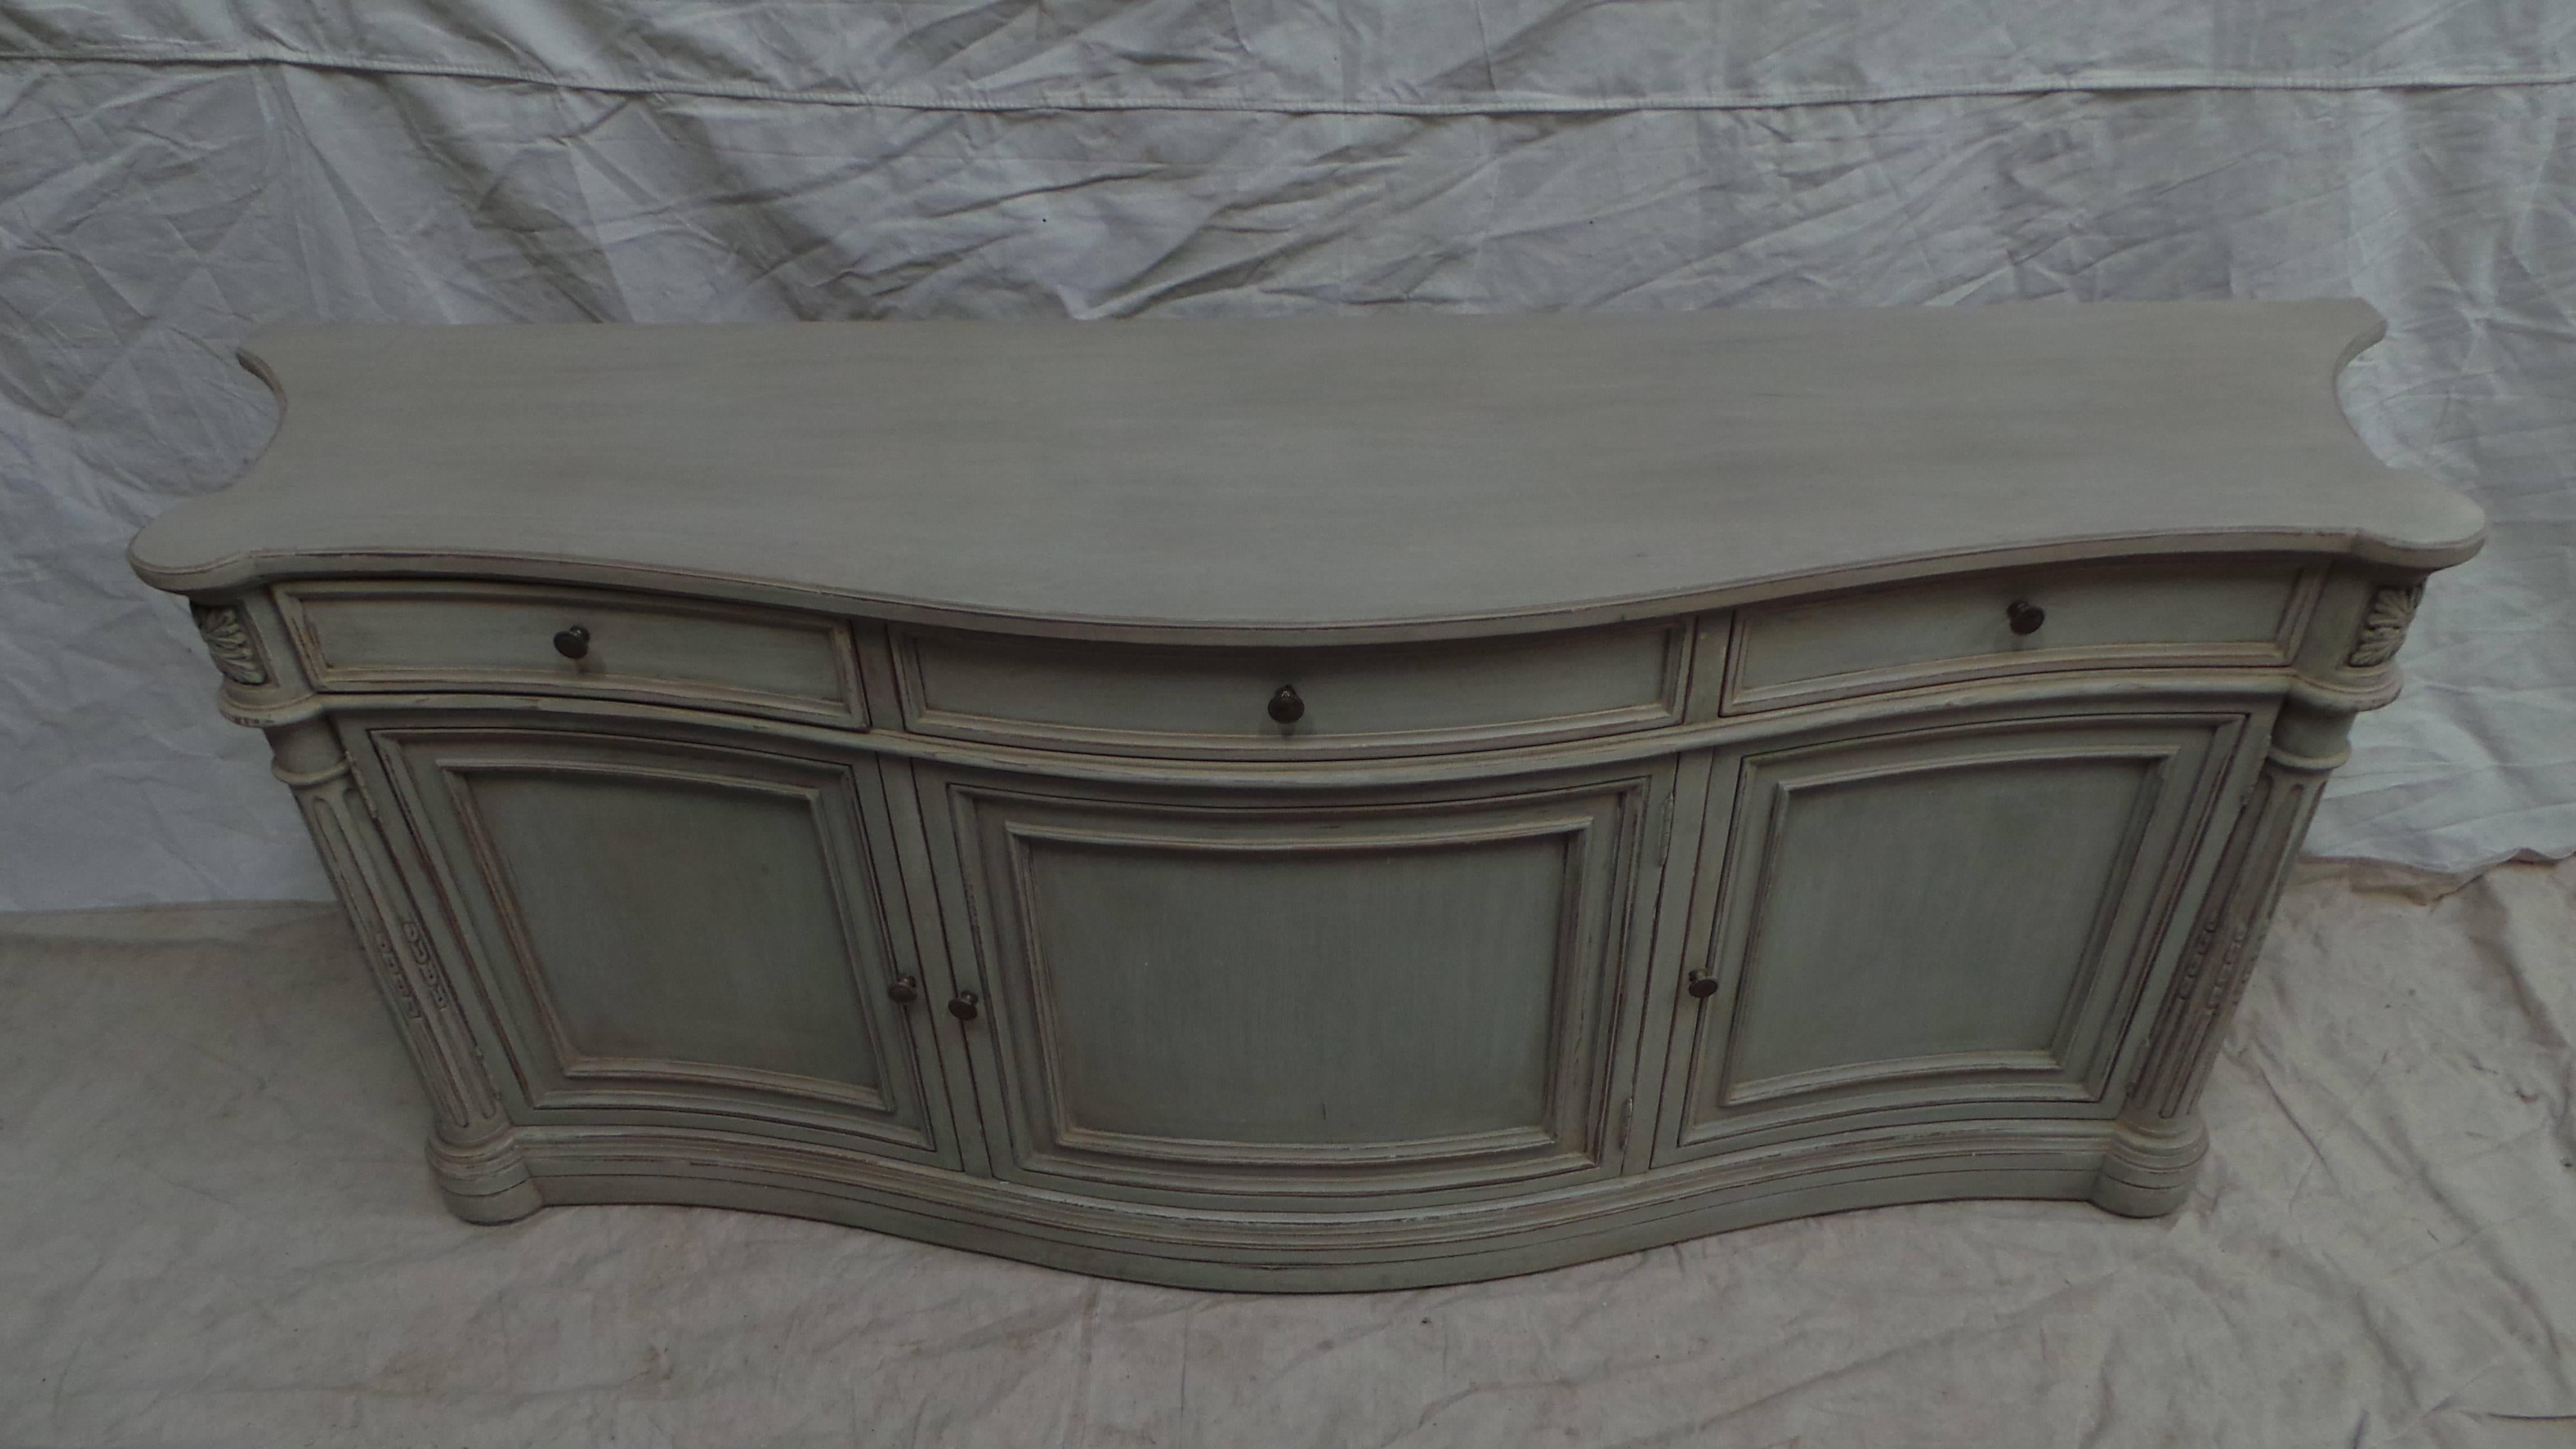 This is a unique Swedish Gustavian sideboard, it was found at a large estate called a 